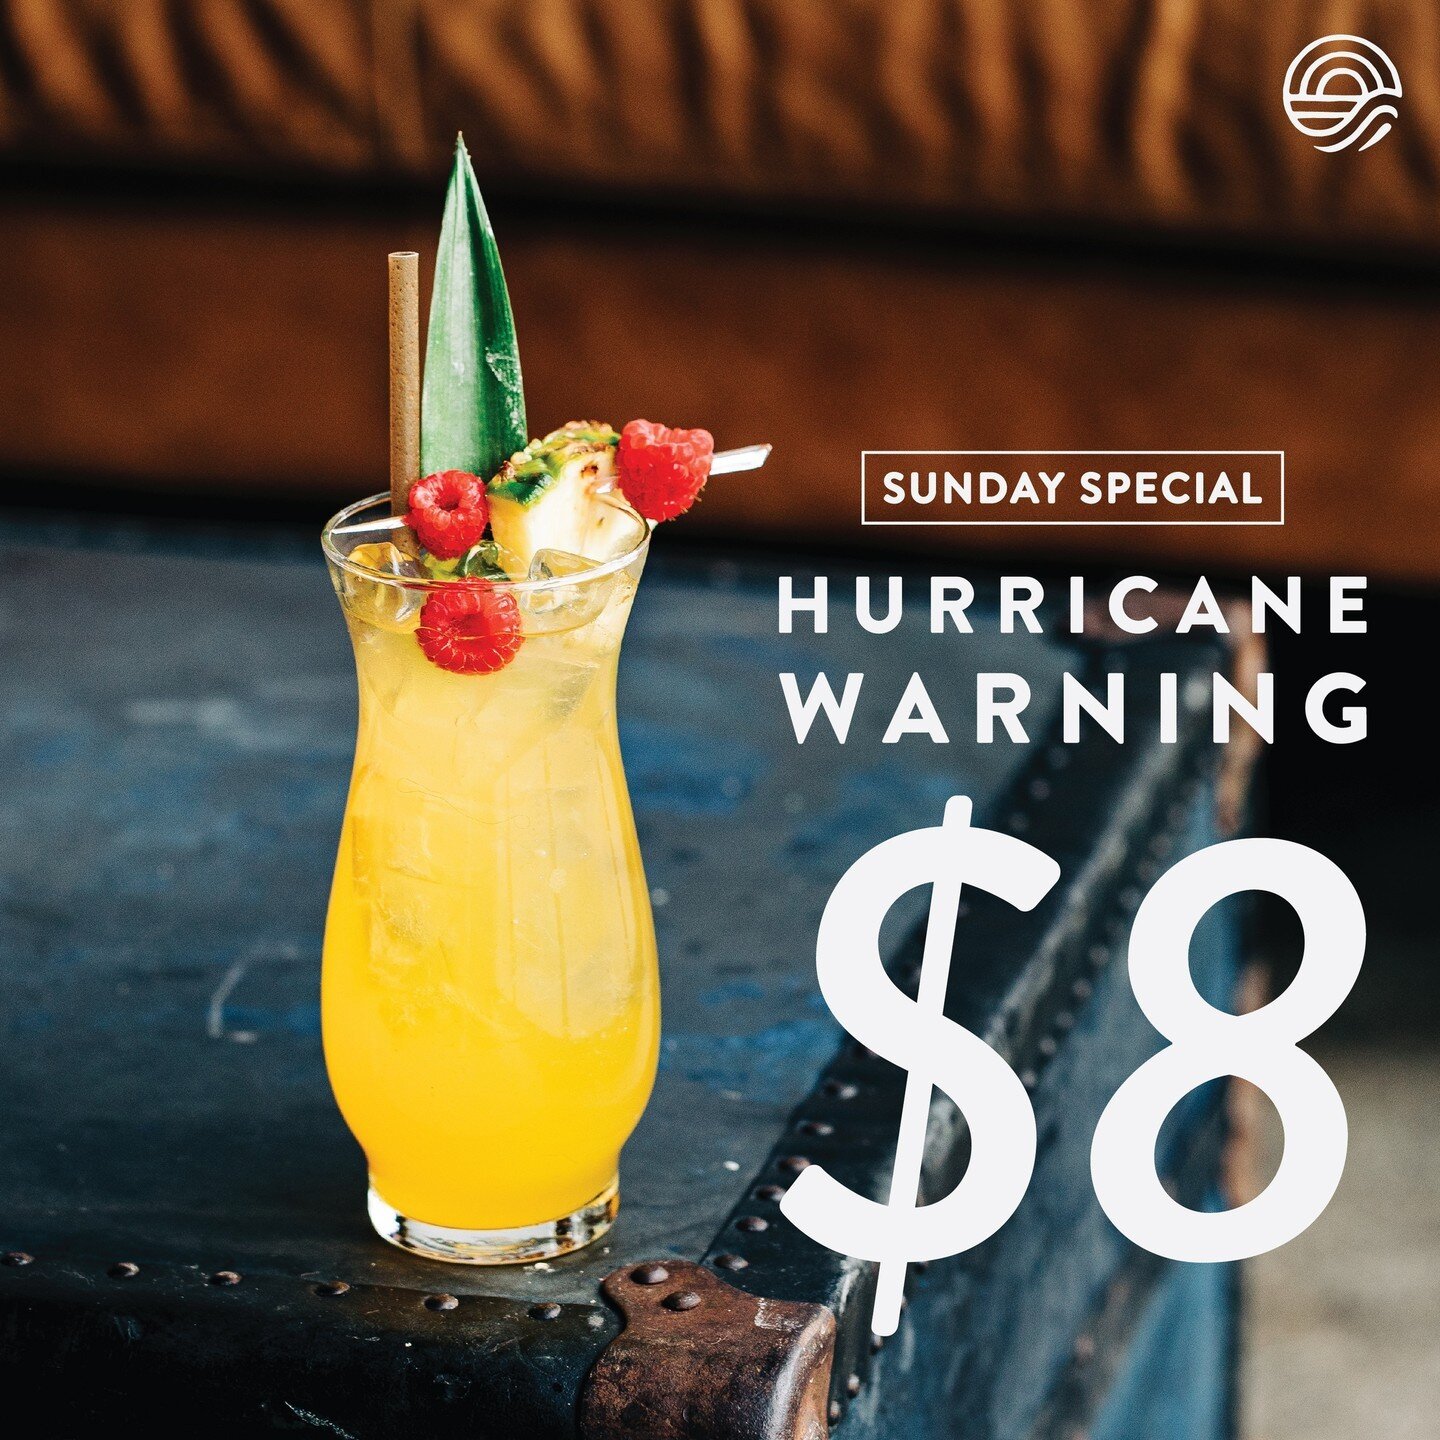 A storm is brewing!⁣⁠
⁣⁠
This storm is one you'll like because we've got $𝟖 𝐇𝐮𝐫𝐫𝐢𝐜𝐚𝐧𝐞 𝗪𝐚𝐫𝐧𝐢𝐧𝐠𝐬 all day long. Made with our award-winning Port of Entry Rum, passionfruit, and lemon. ⁣⁣⁠
⁣⁠
𝐒𝐮𝐧𝐝𝐚𝐲⁣⁣⁠⁣⁠
~ Live Music: @quiktraxgso